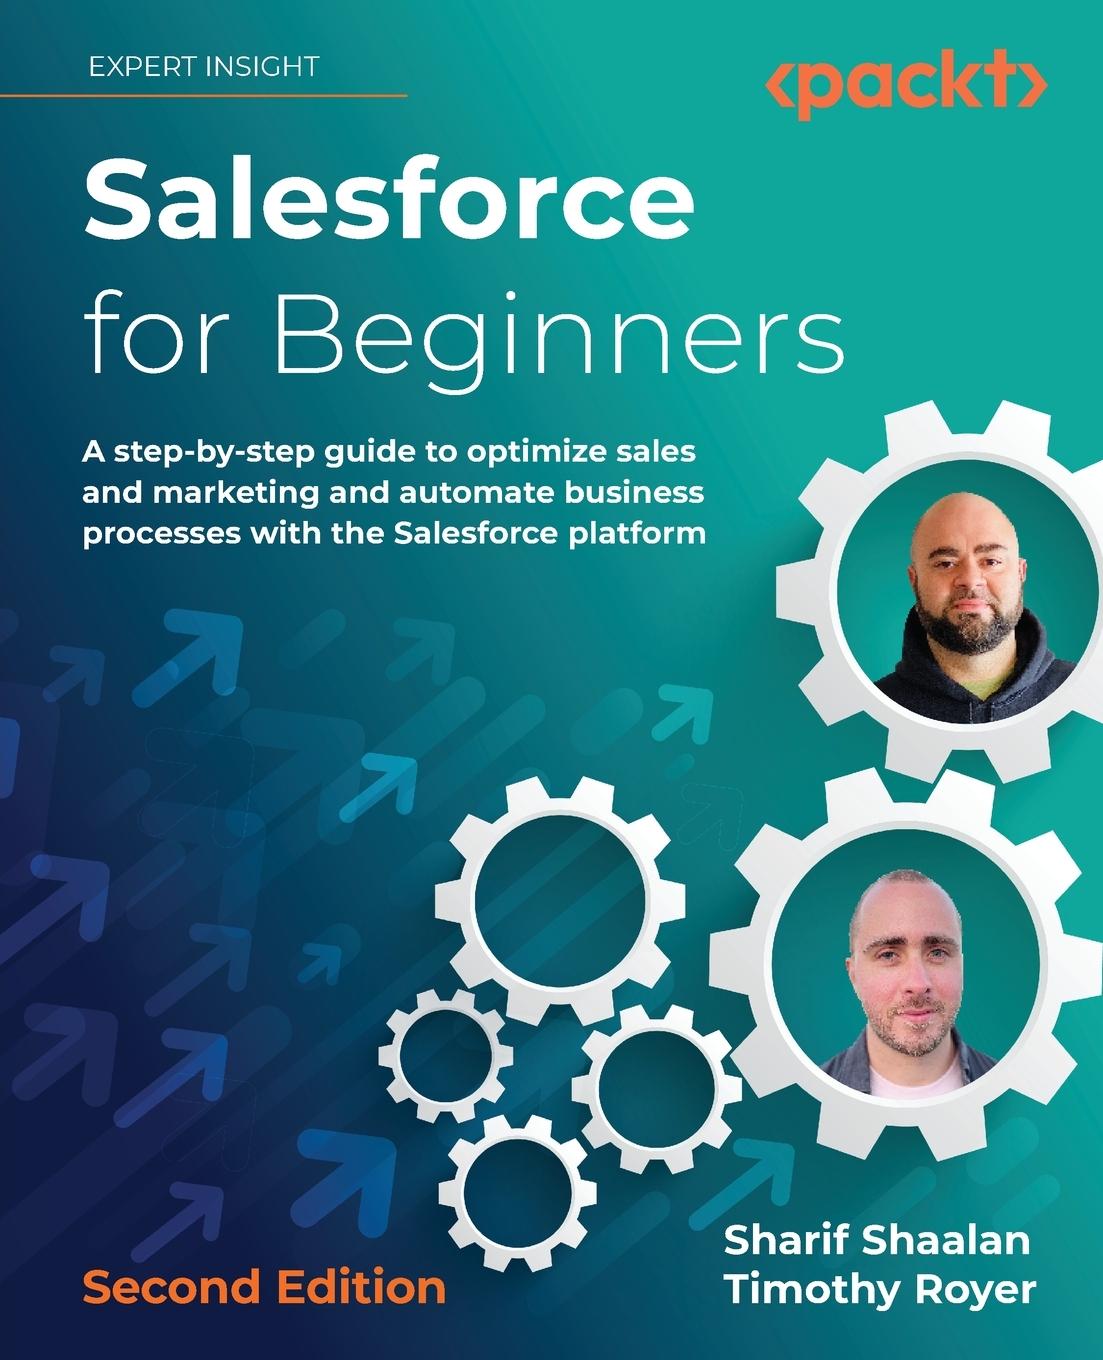 Book Salesforce for Beginners - Second Edition Timothy Royer